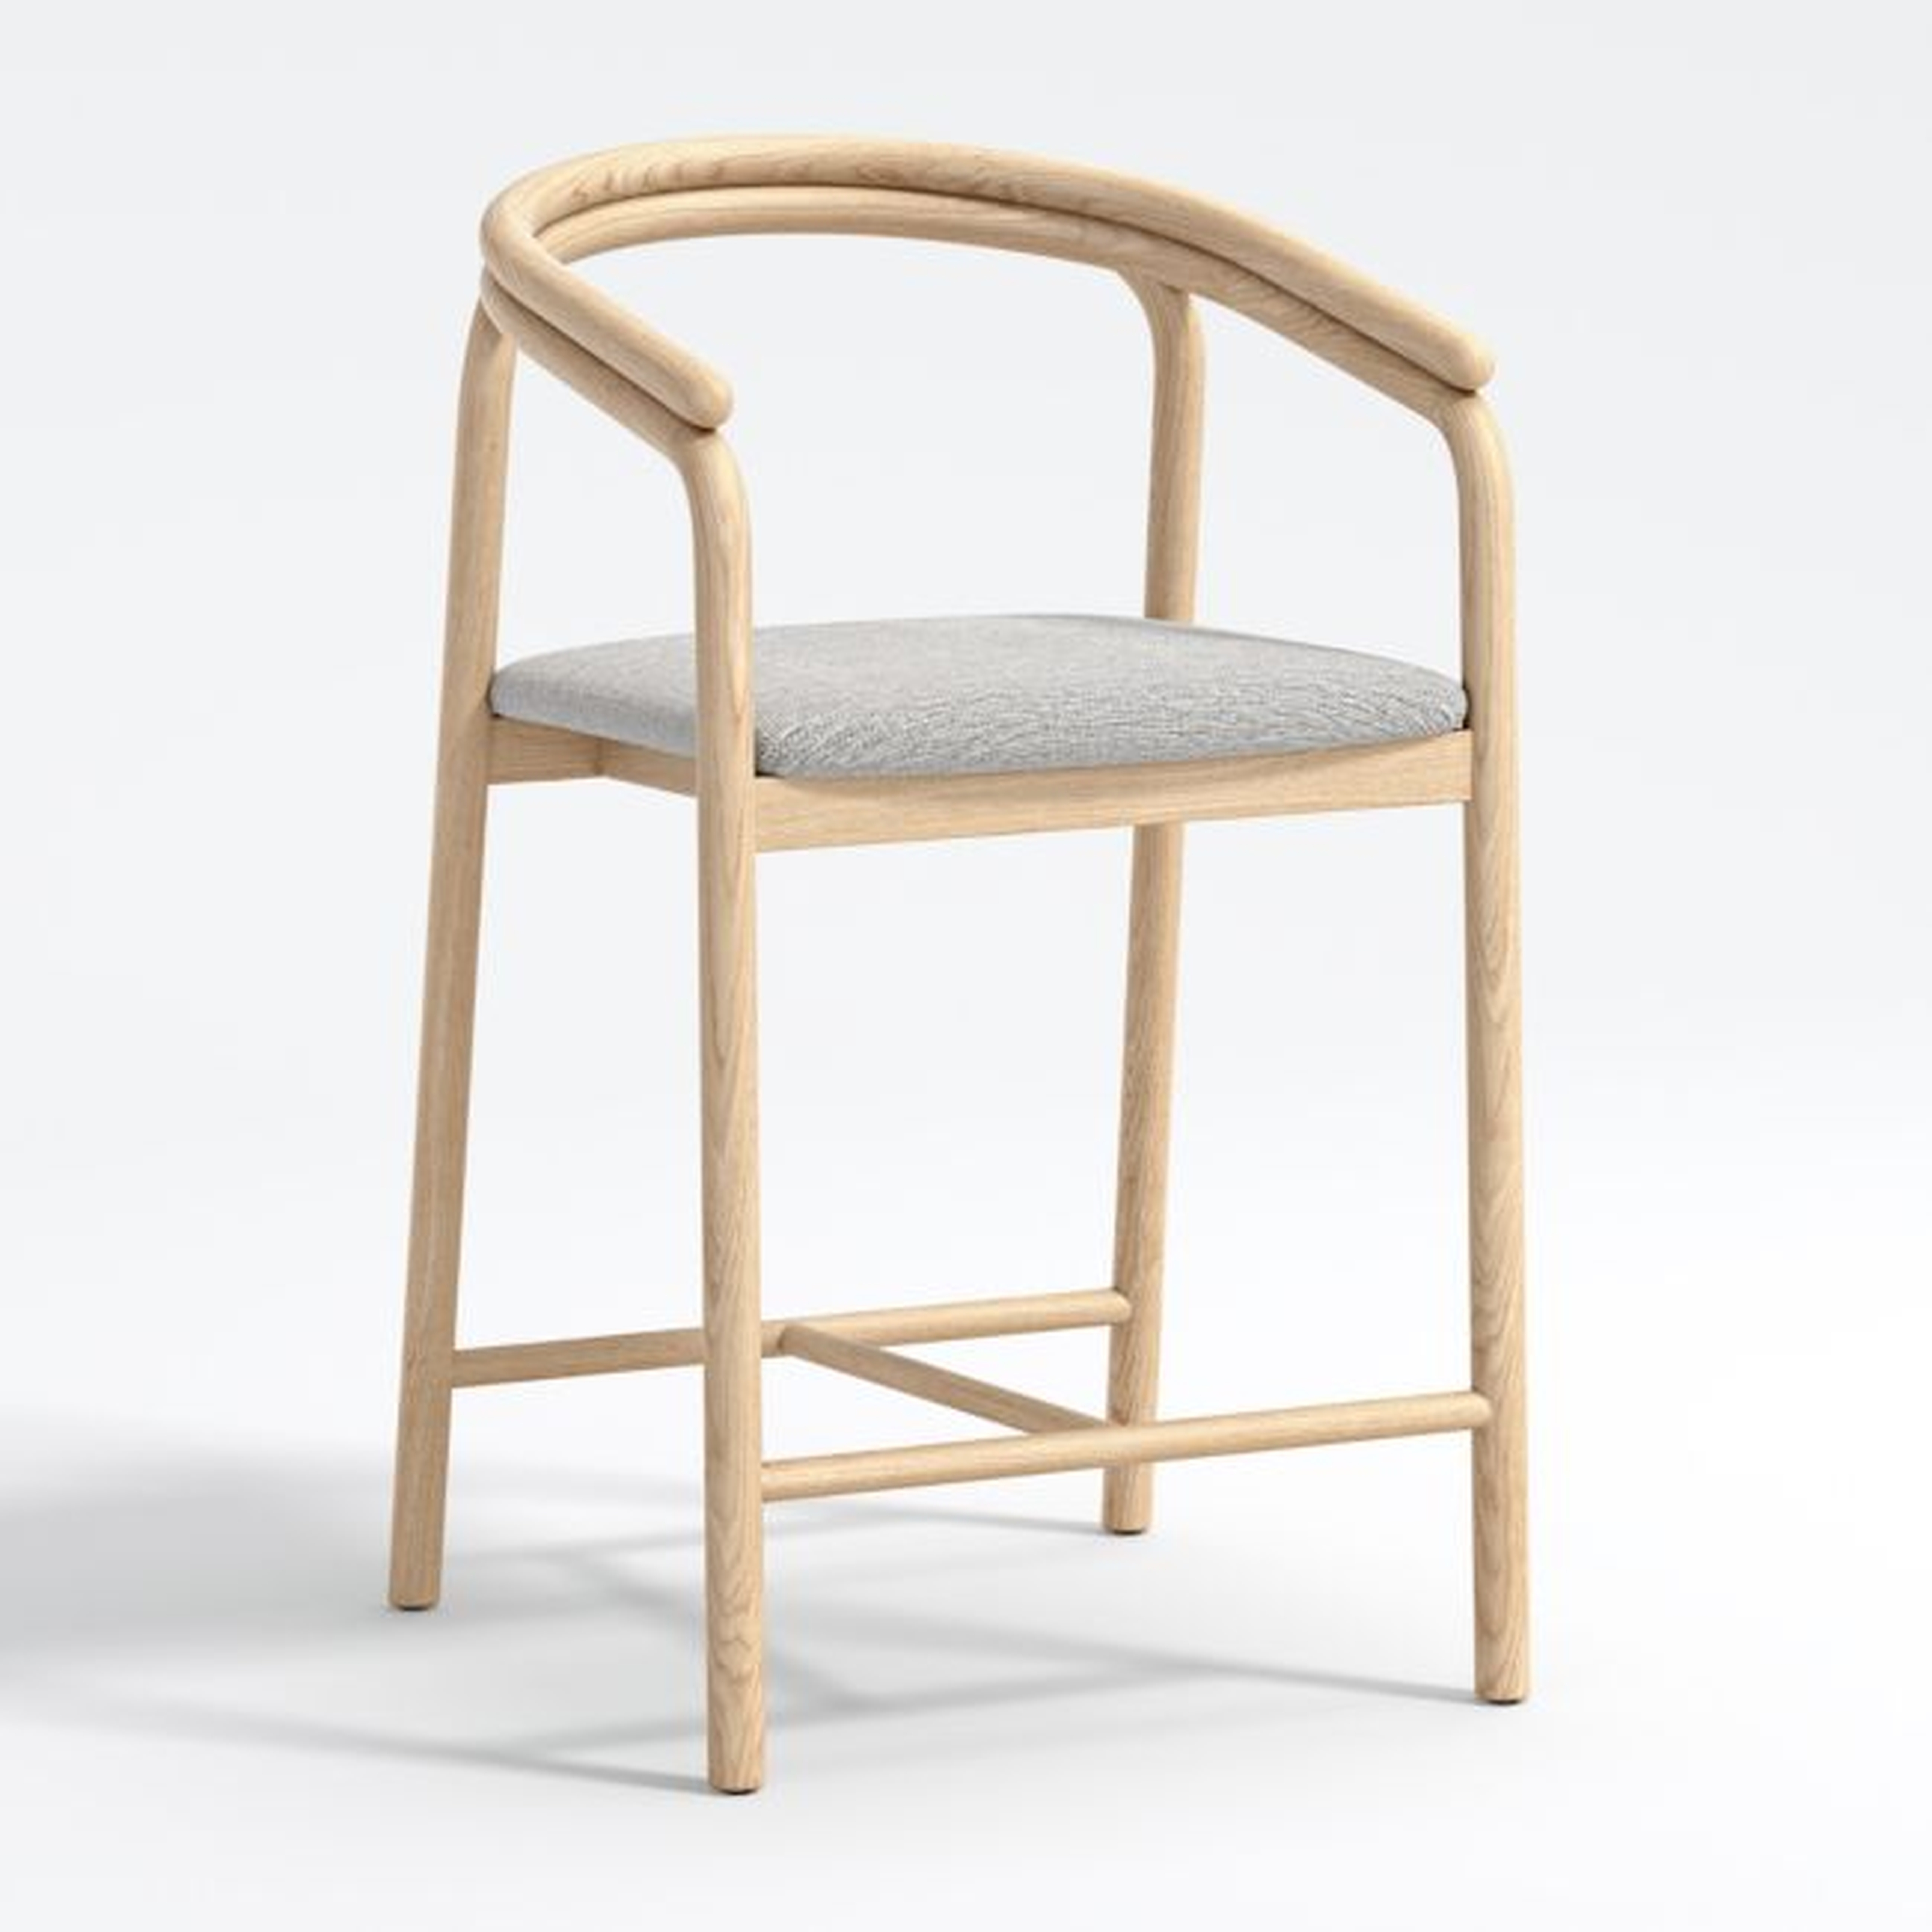 Redonda Wood Upholstered Counter Stool - Crate and Barrel